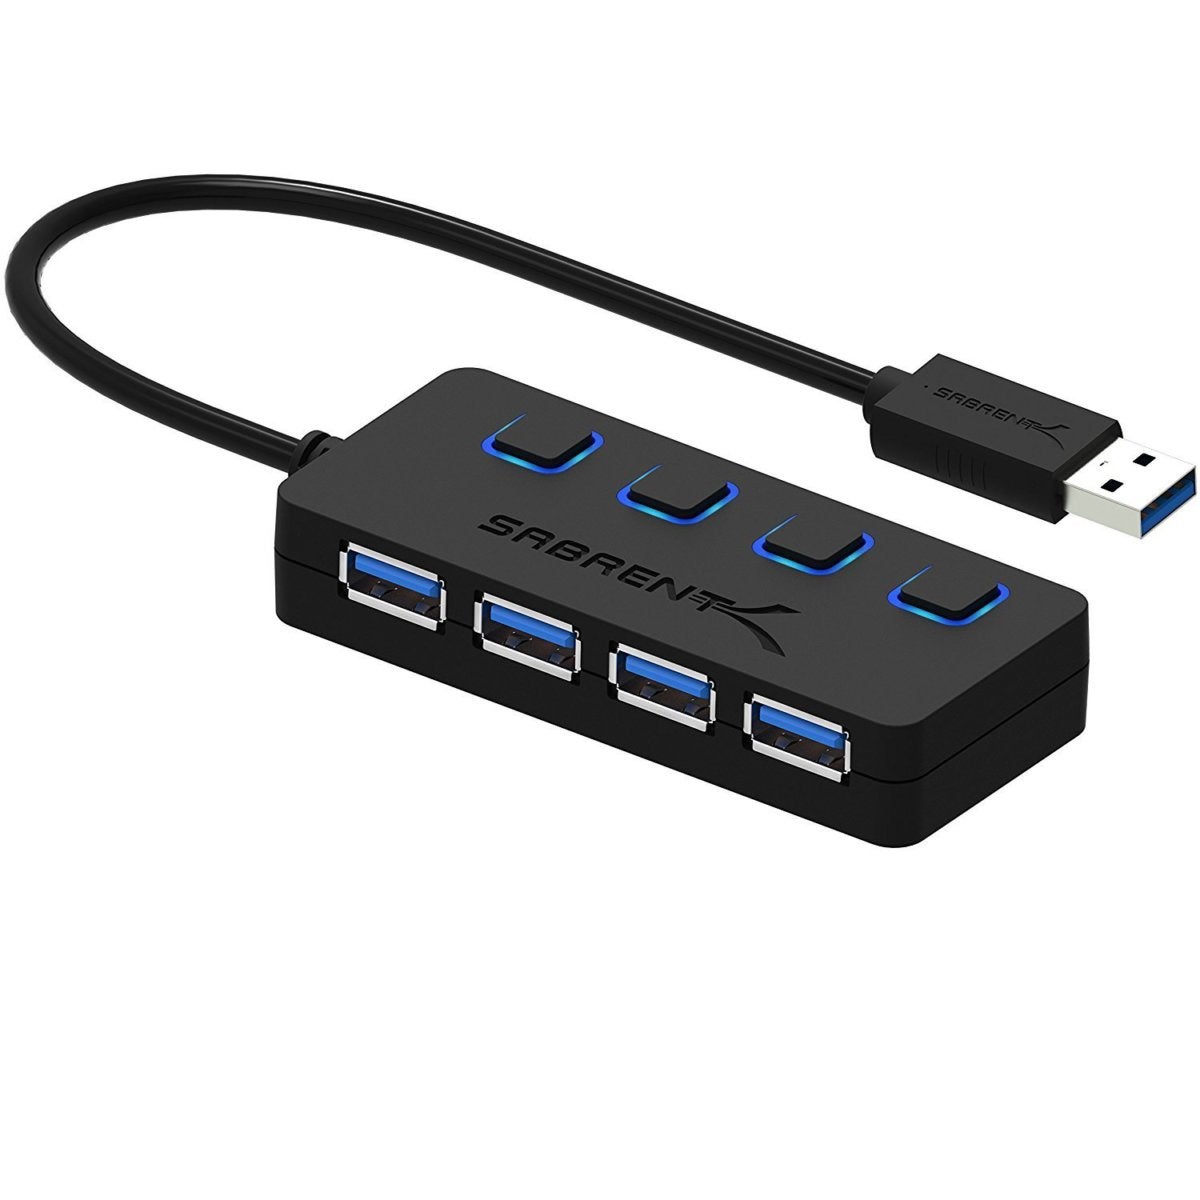 You can get Sabrent's super-popular 4-port USB hub for less than $5